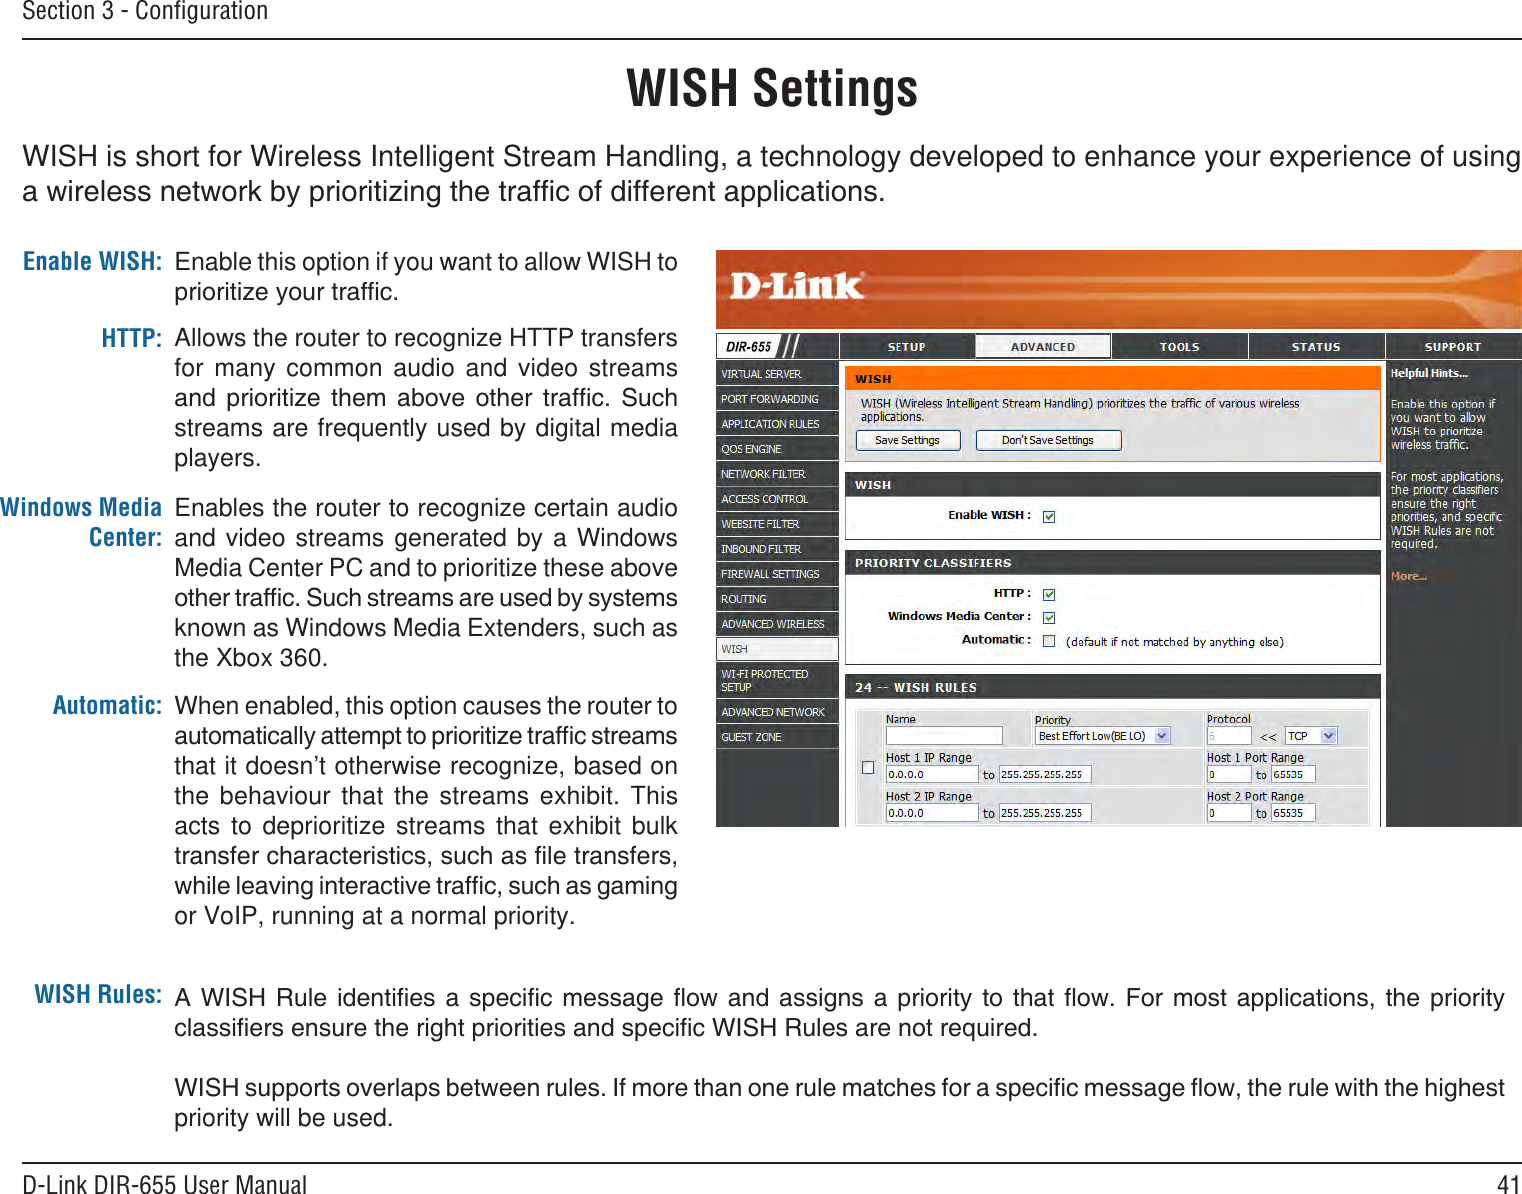 41D-Link DIR-655 User ManualSection 3 - ConﬁgurationWISH SettingsWISH is short for Wireless Intelligent Stream Handling, a technology developed to enhance your experience of using Enable this option if you want to allow WISH to Enable WISH:Allows the router to recognize HTTP transfers for  many  common  audio  and  video  streams       streams are frequently used by digital media players. HTTP:Enables the router to recognize certain audio and video  streams generated  by  a Windows Media Center PC and to prioritize these above known as Windows Media Extenders, such as the Xbox 360. Windows Media Center:When enabled, this option causes the router to that it doesn’t otherwise recognize, based on the  behaviour  that  the  streams  exhibit.  This acts  to  deprioritize  streams  that  exhibit  bulk or VoIP, running at a normal priority.Automatic:WISH Rules:         priority will be used. 